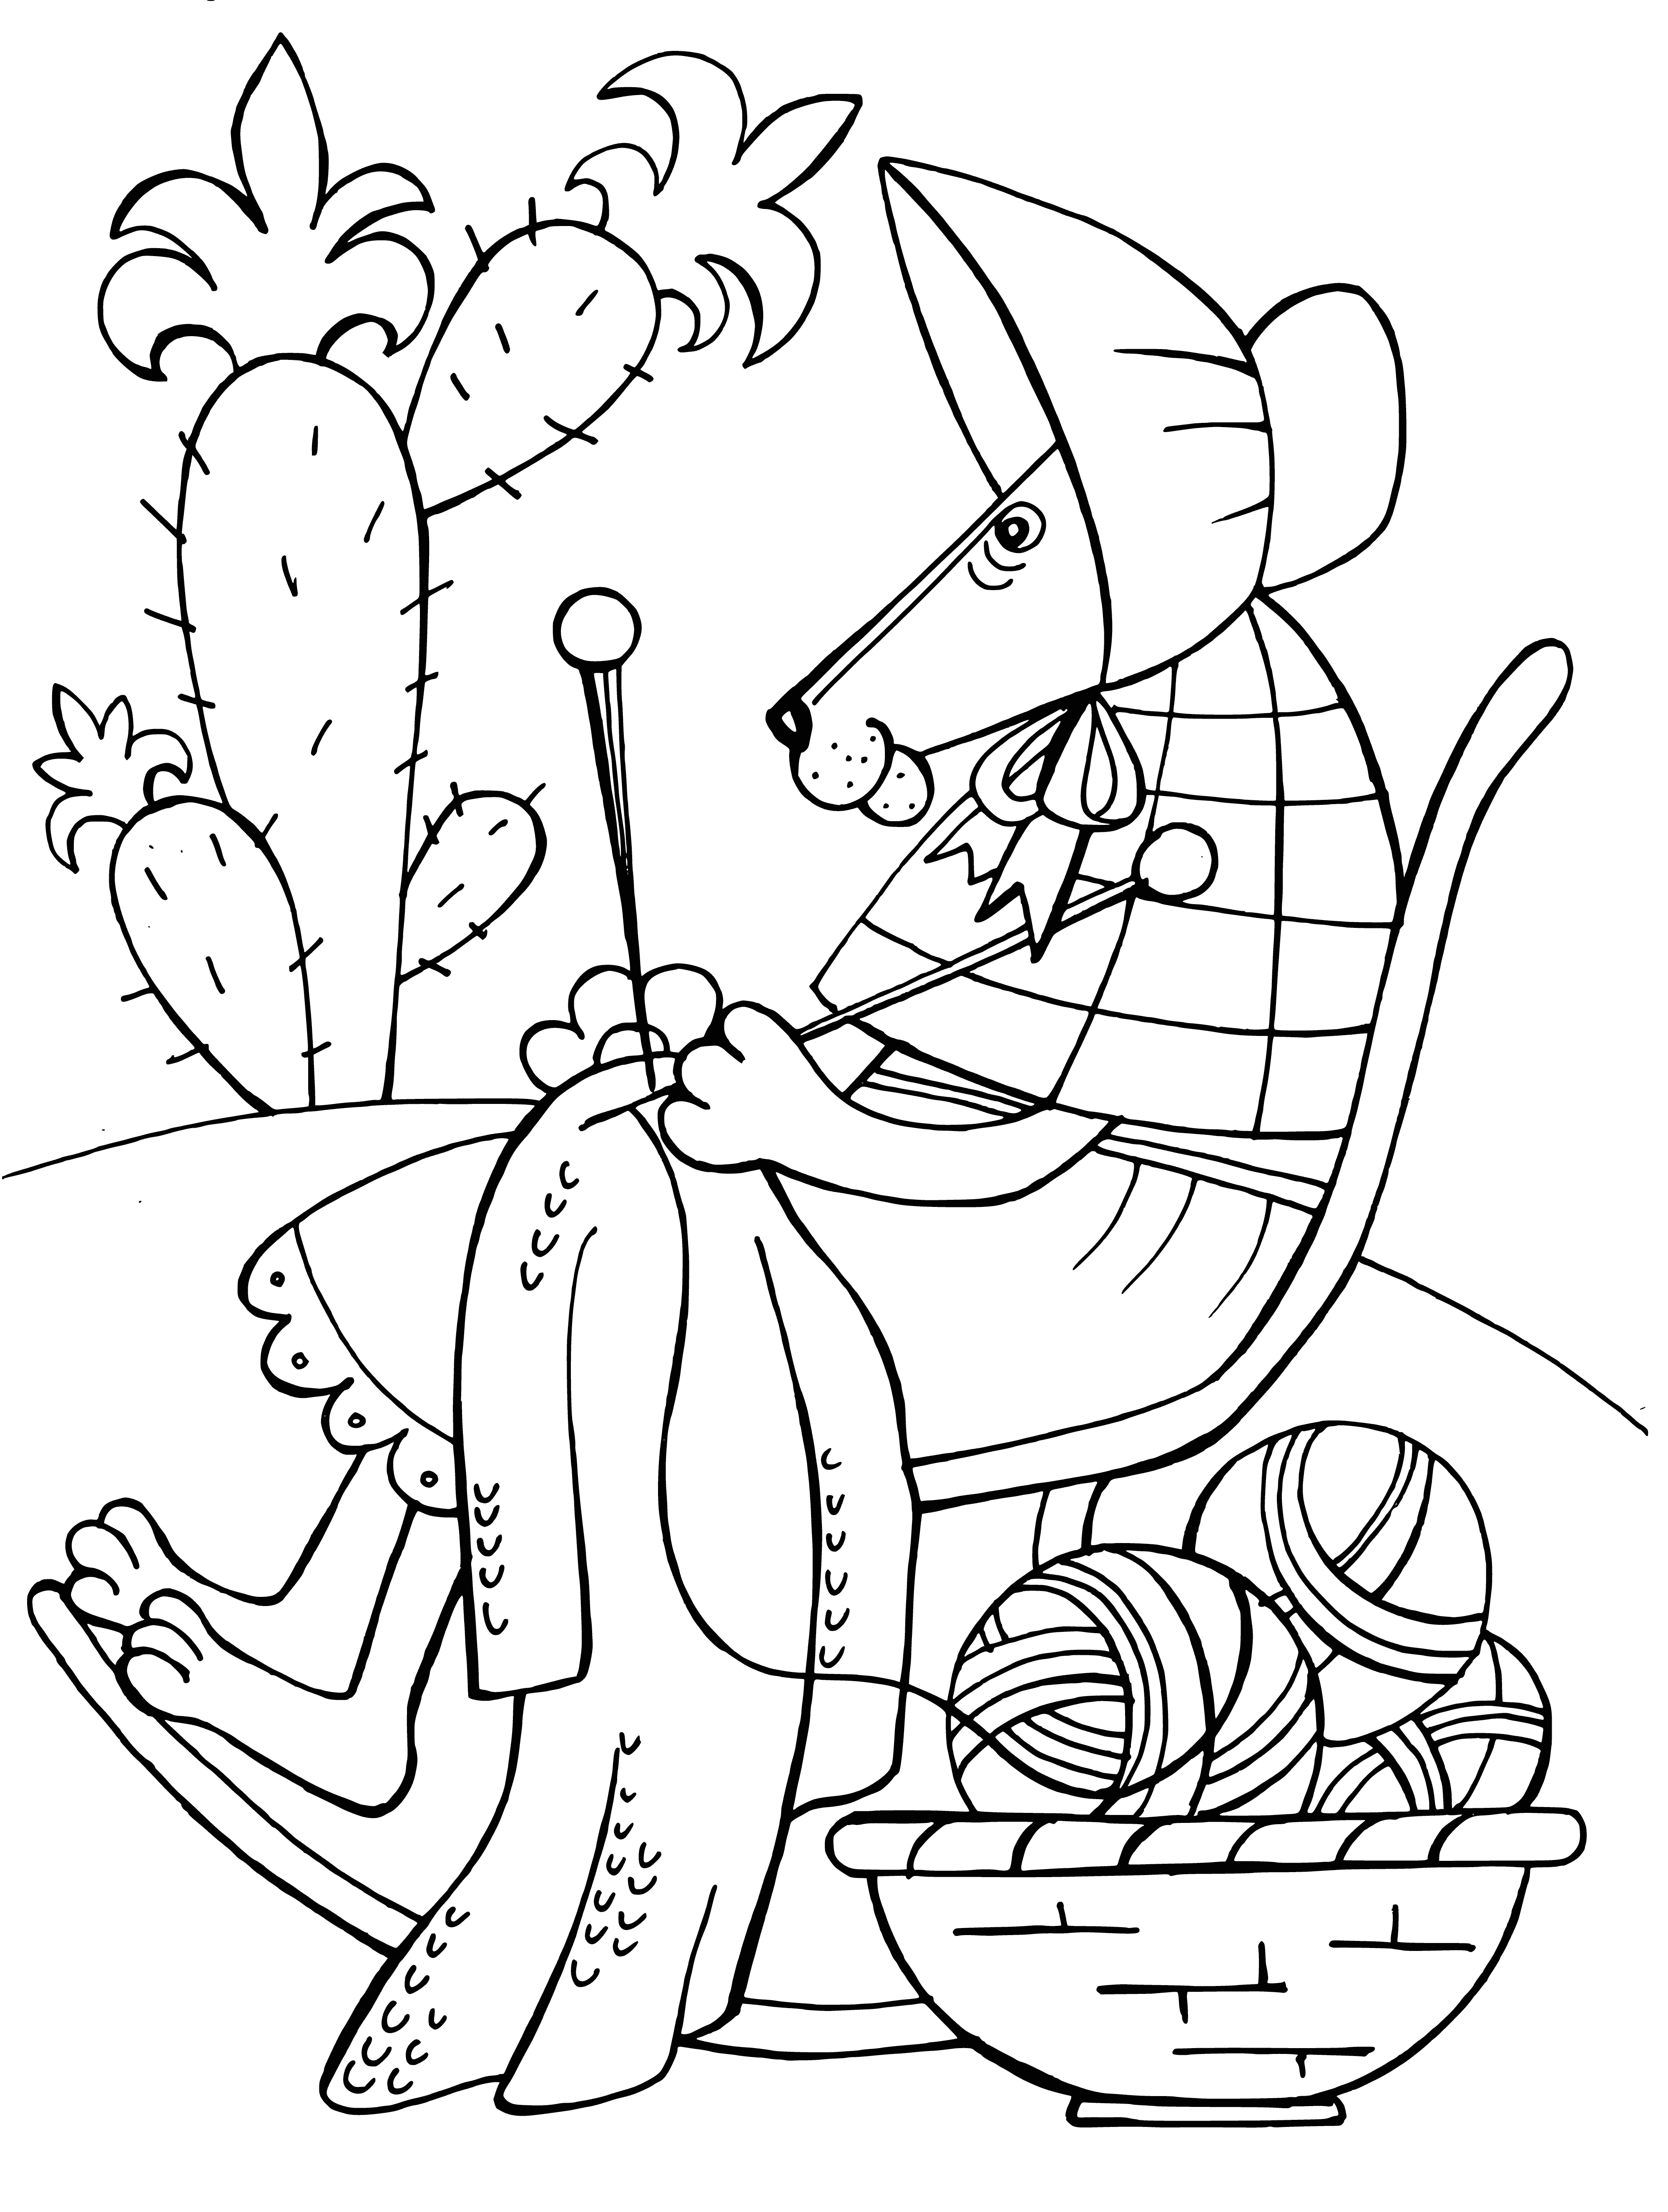 coloring page: Woman happily sits in chair with cat on her lap, wearing blue dress, white collar, blue scarf, and white hair. #cats